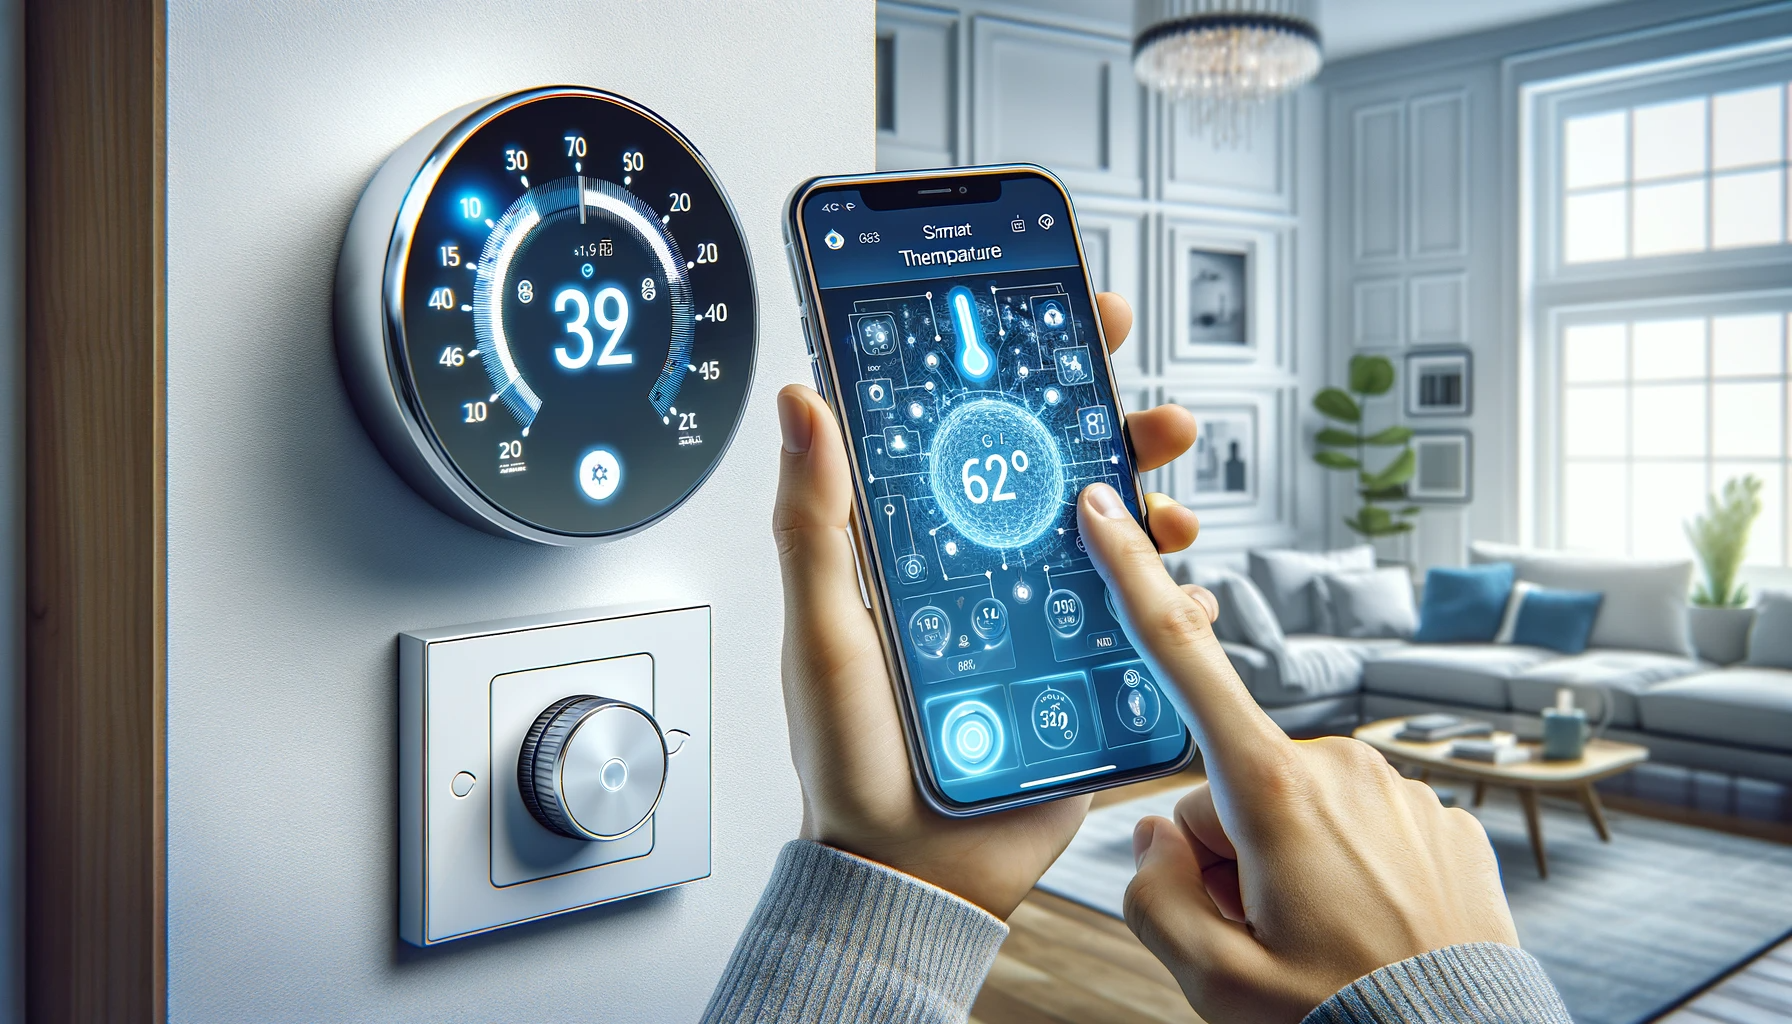 a  smart thermostat and smart phone with connected app 